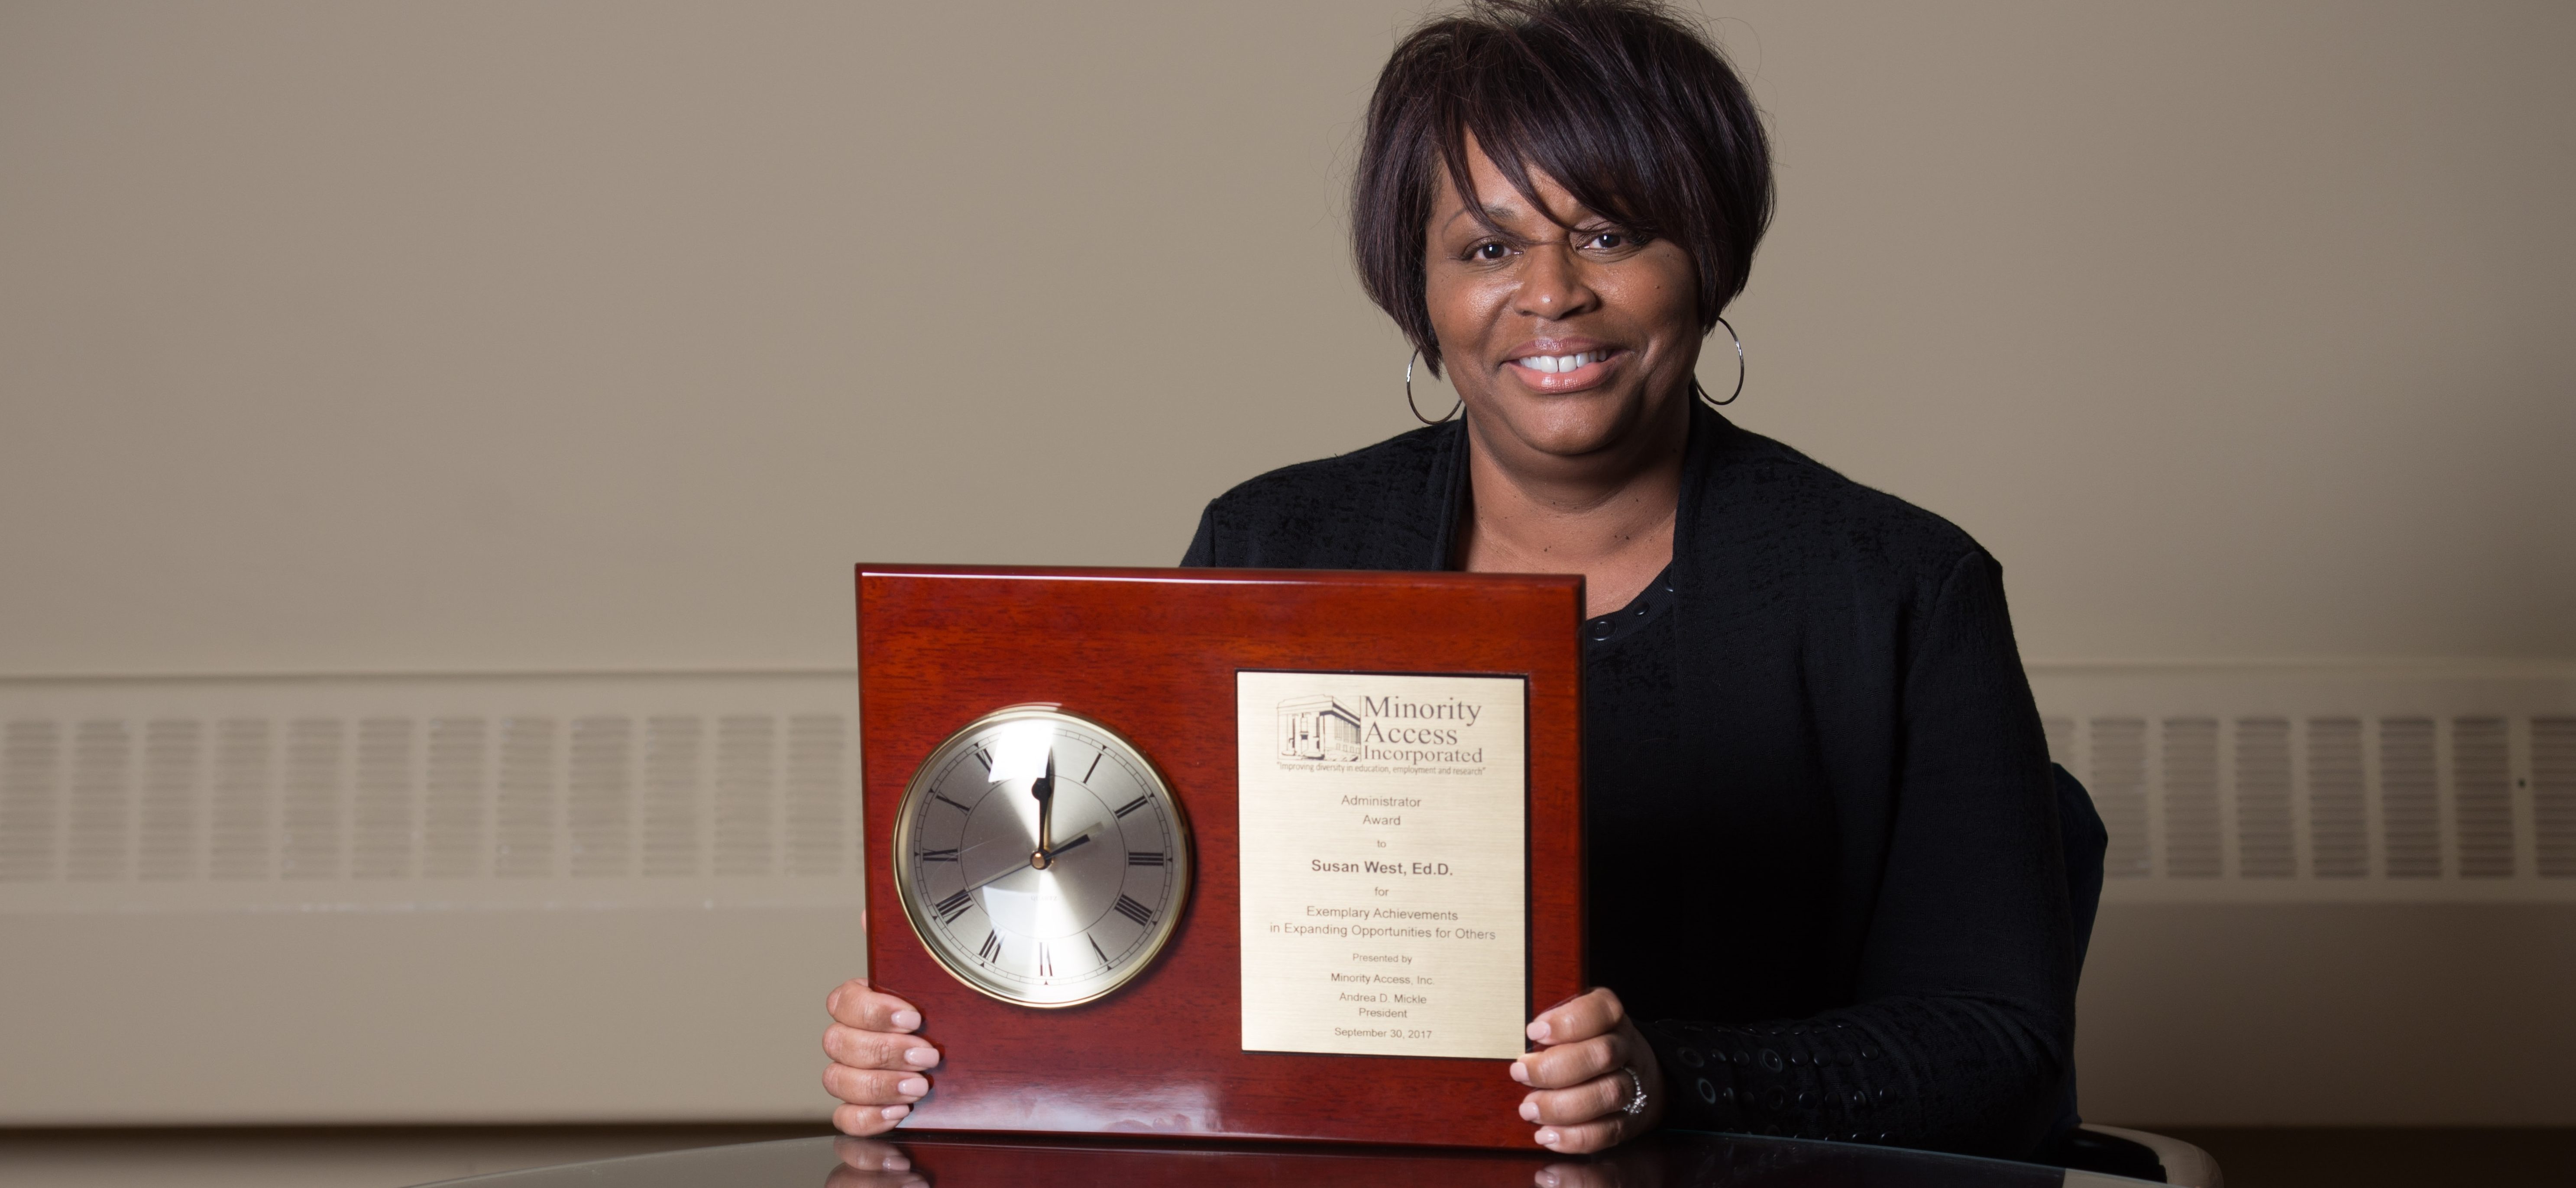 Dr. West and her award from Minority Access, Inc.